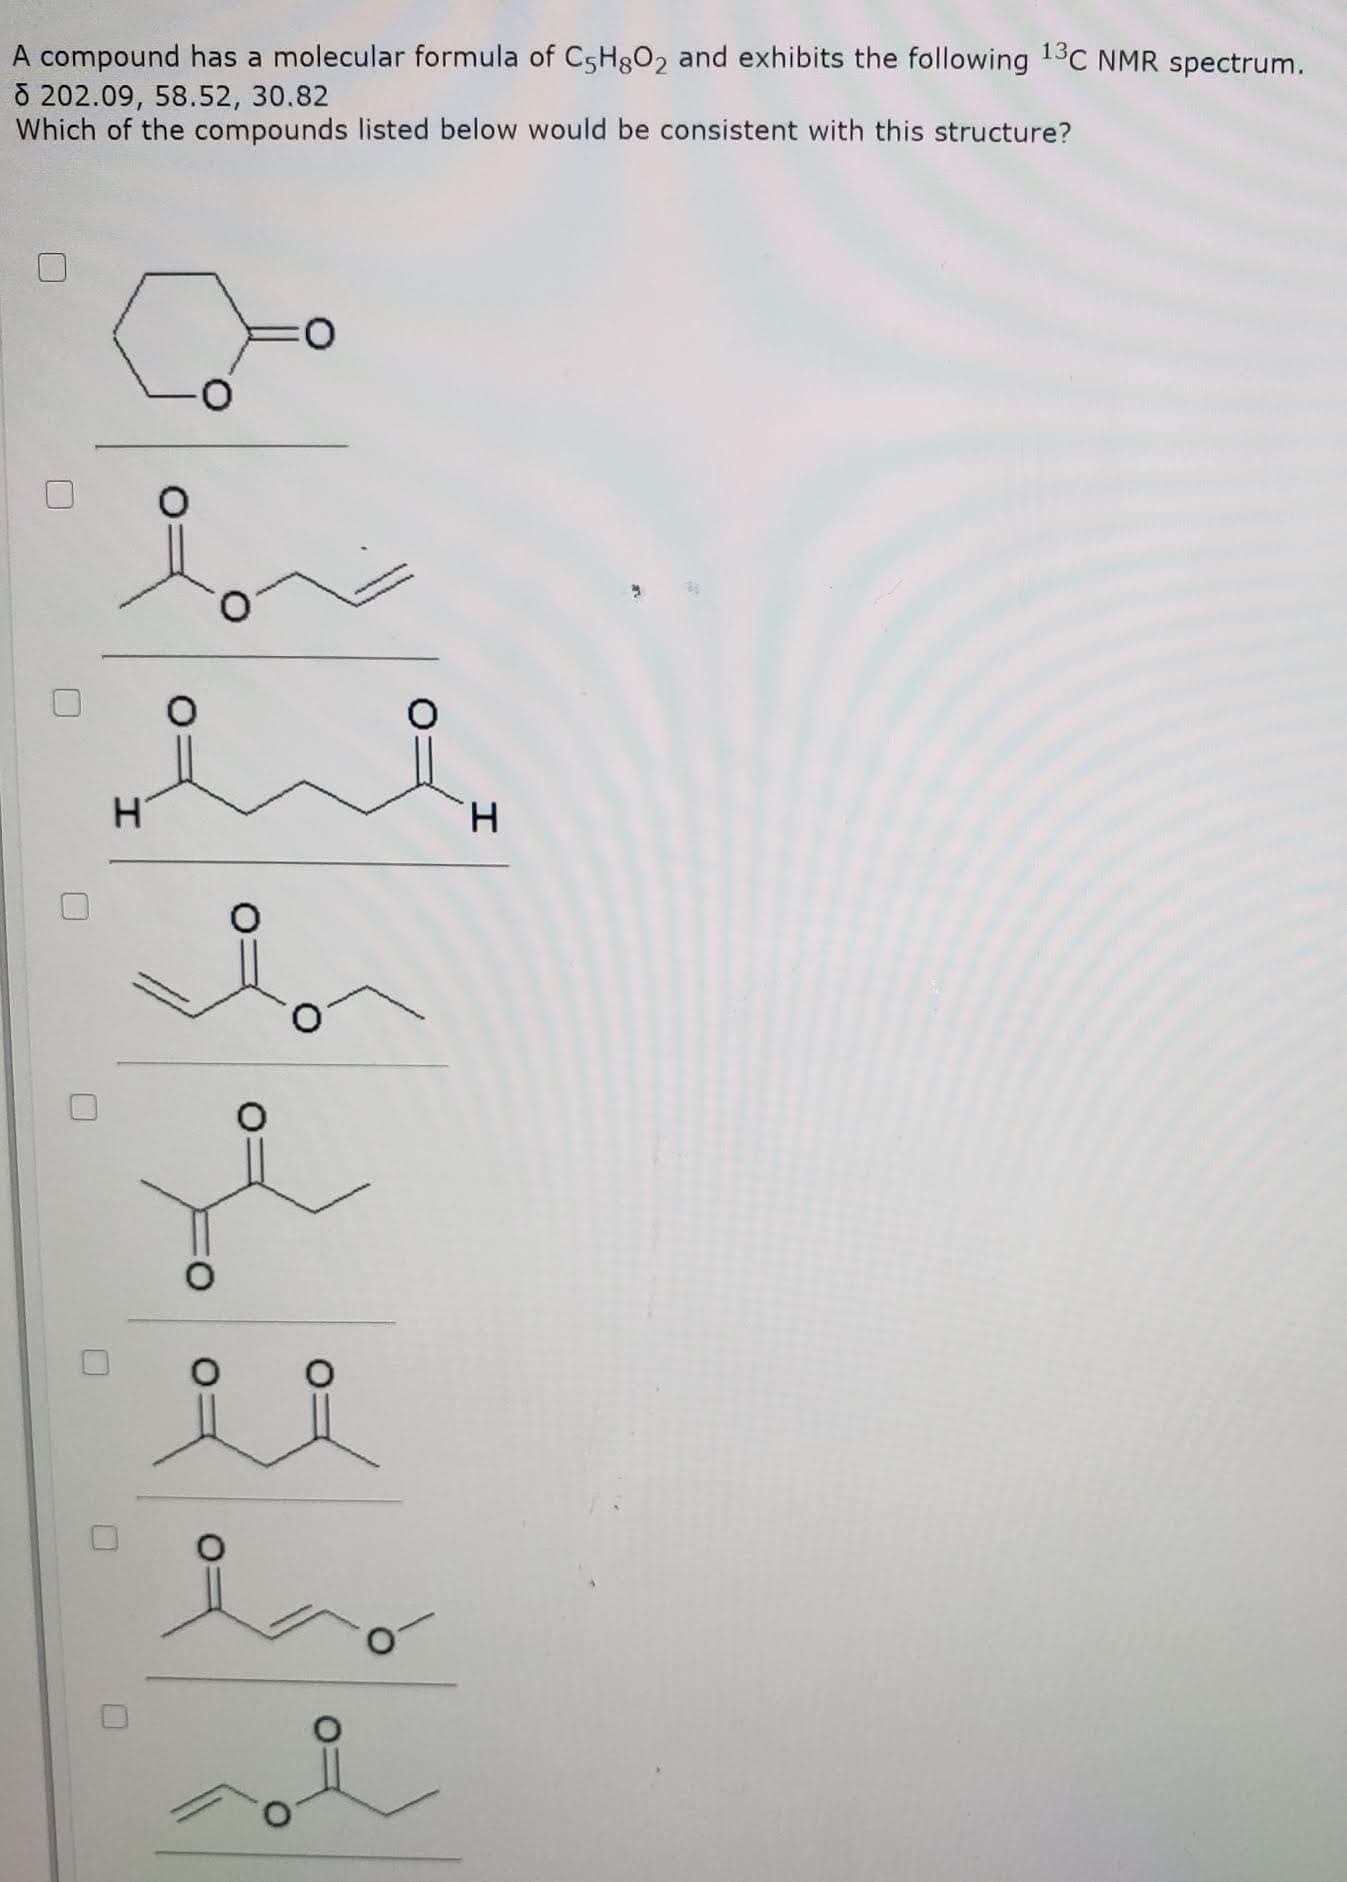 A compound has a molecular formula of C5H802 and exhibits the following 13C NMR spectrum.
8 202.09, 58.52, 30.82
Which of the compounds listed below would be consistent with this structure?
H.
